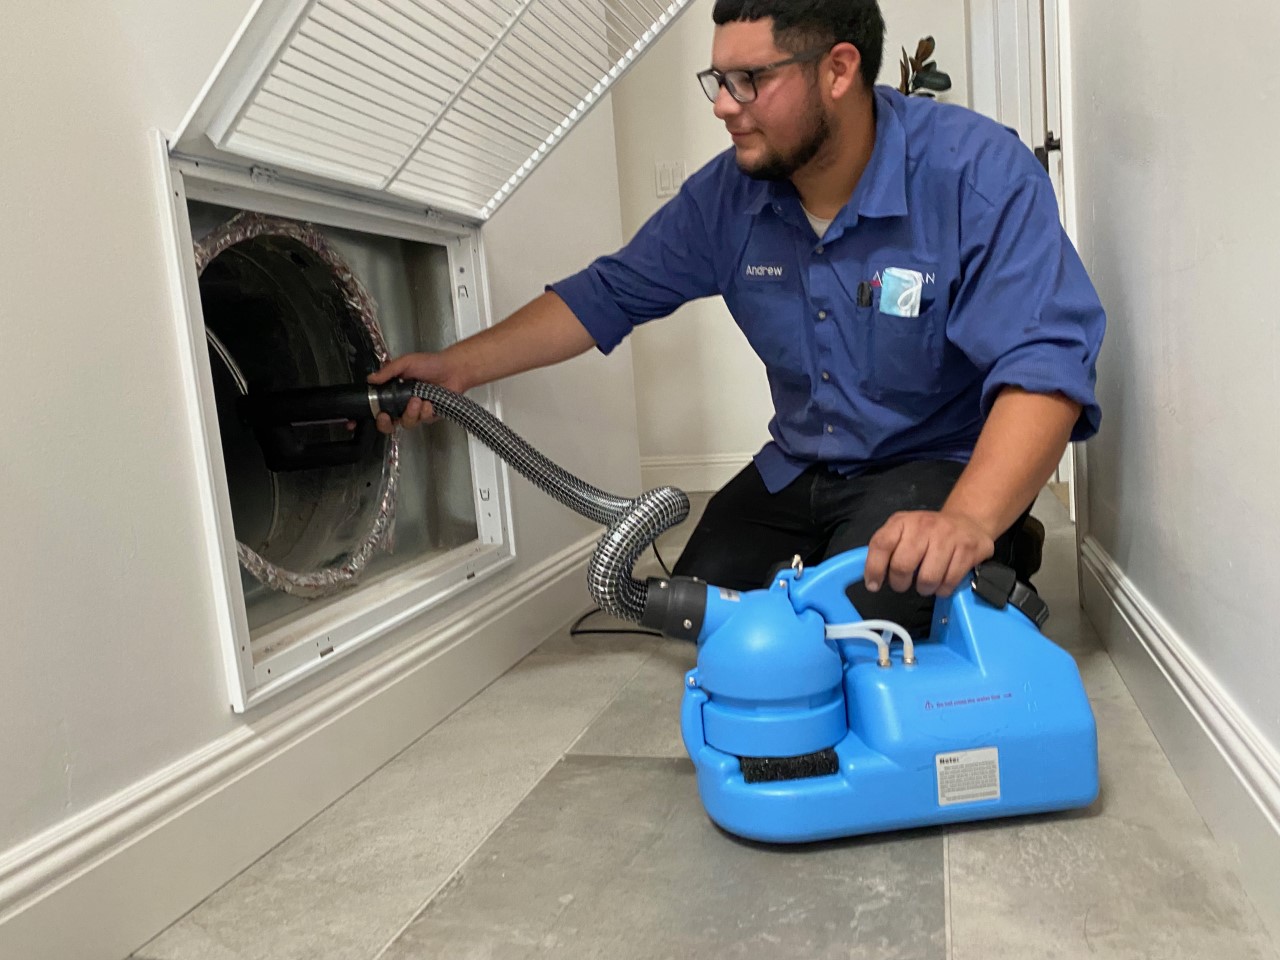 Dust particles and dander collect in air ducts over time. Clean them out regularly with American Energy Air Sacramento, Folsom and Loomis California